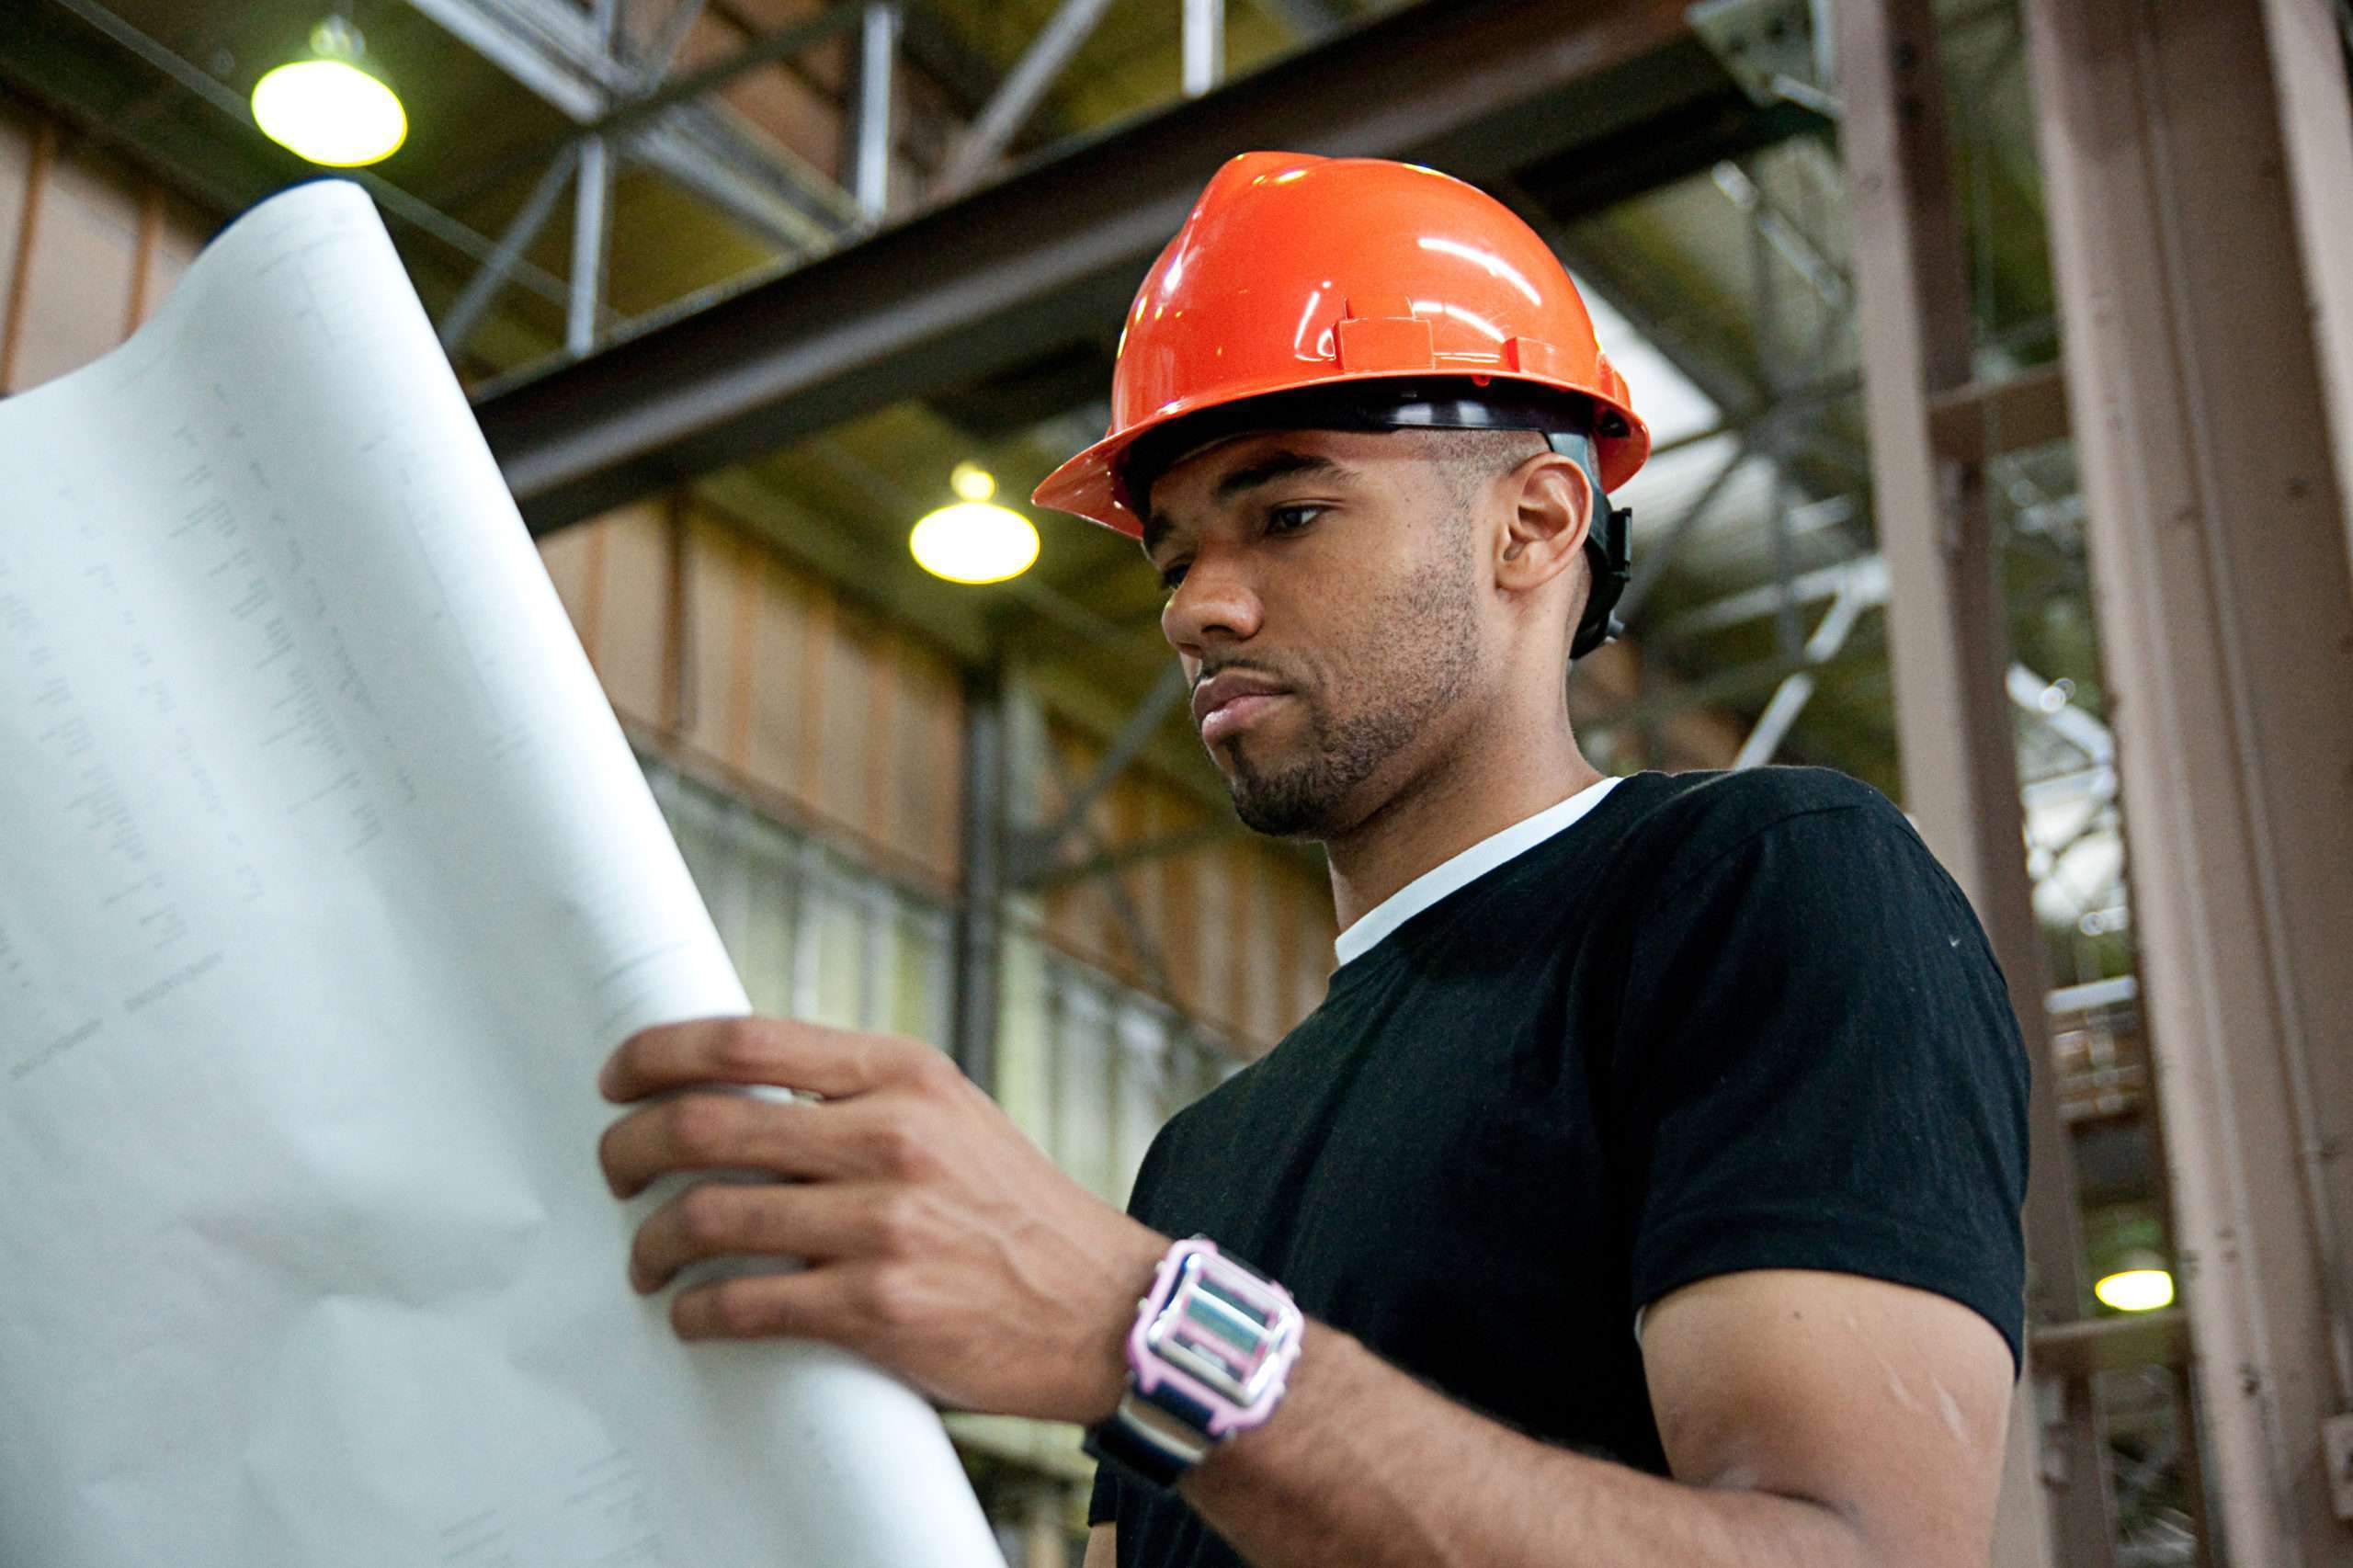 A Black-American Construction Worker